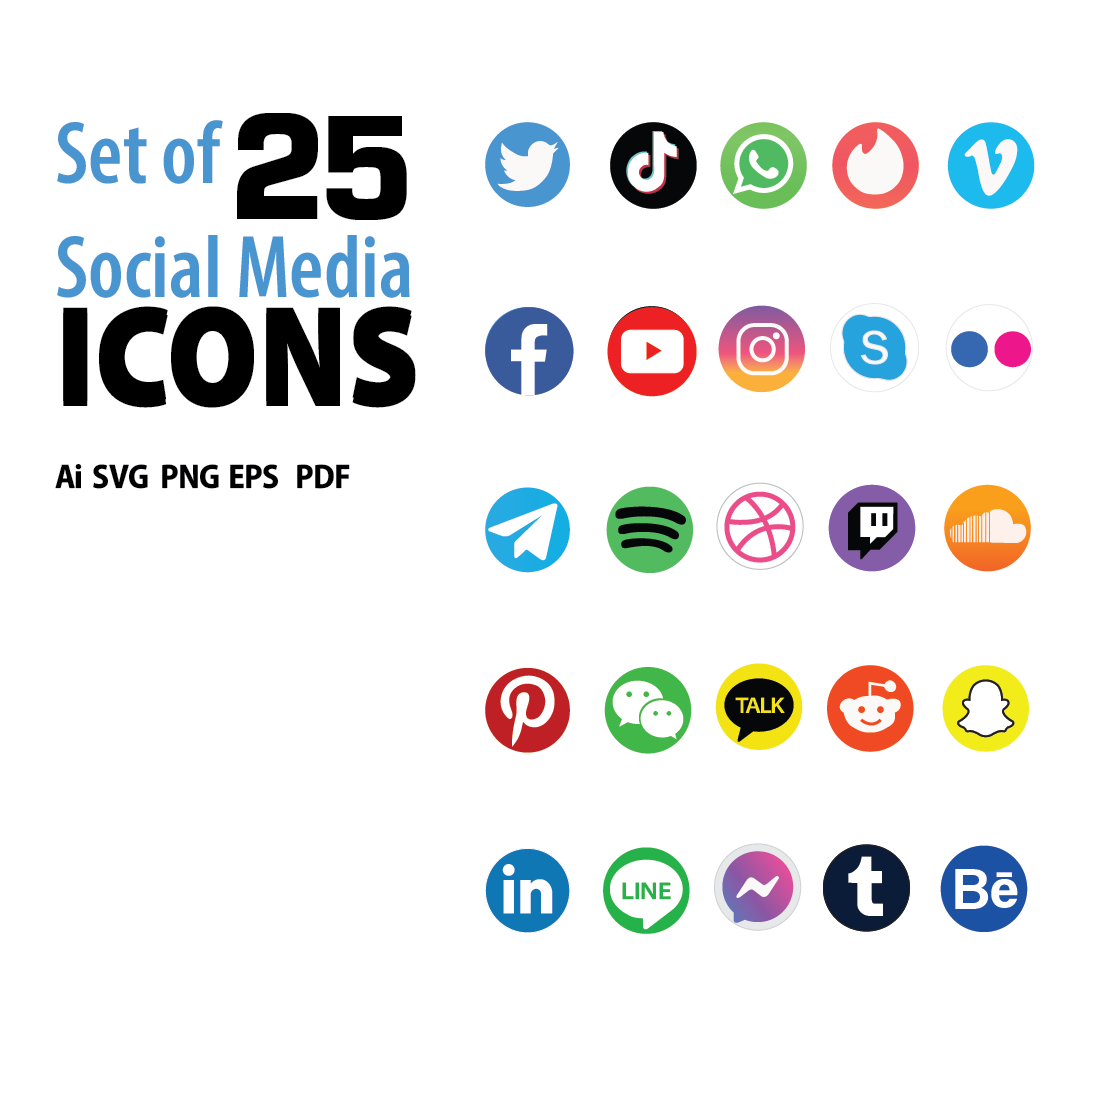 Set of 25 Social Media Icons cover image.